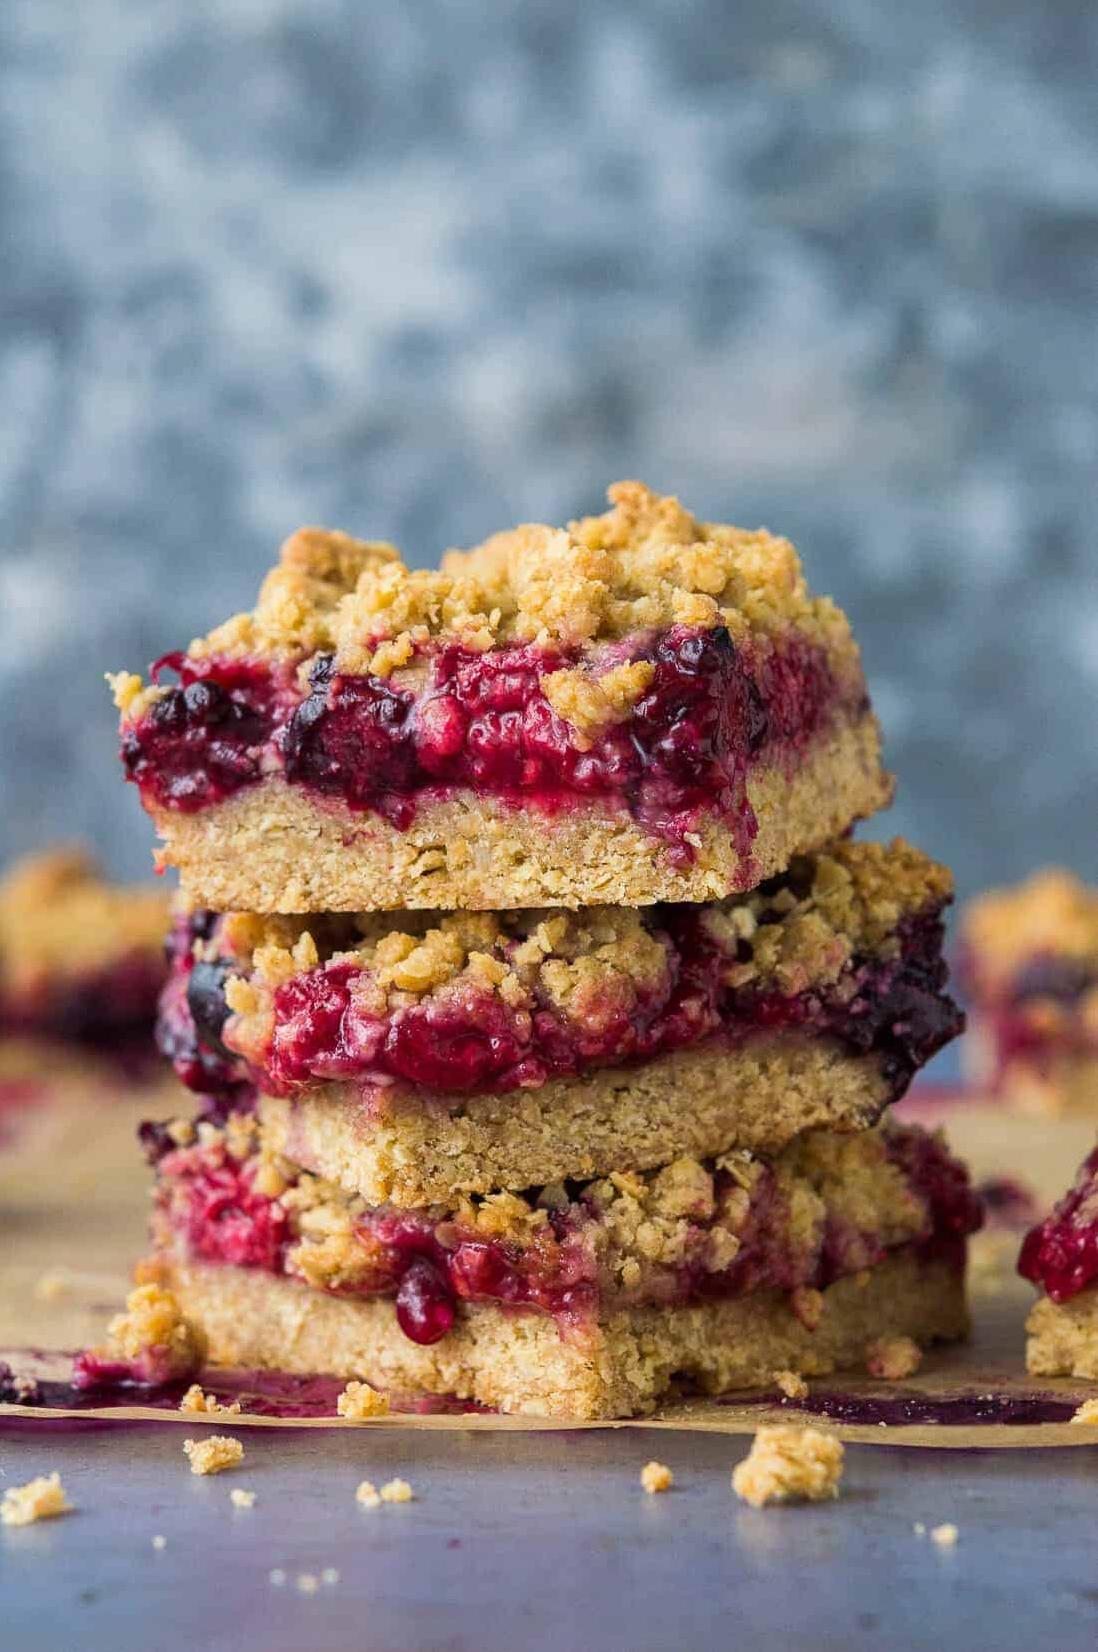  These berry bars are the perfect mid-day treat.